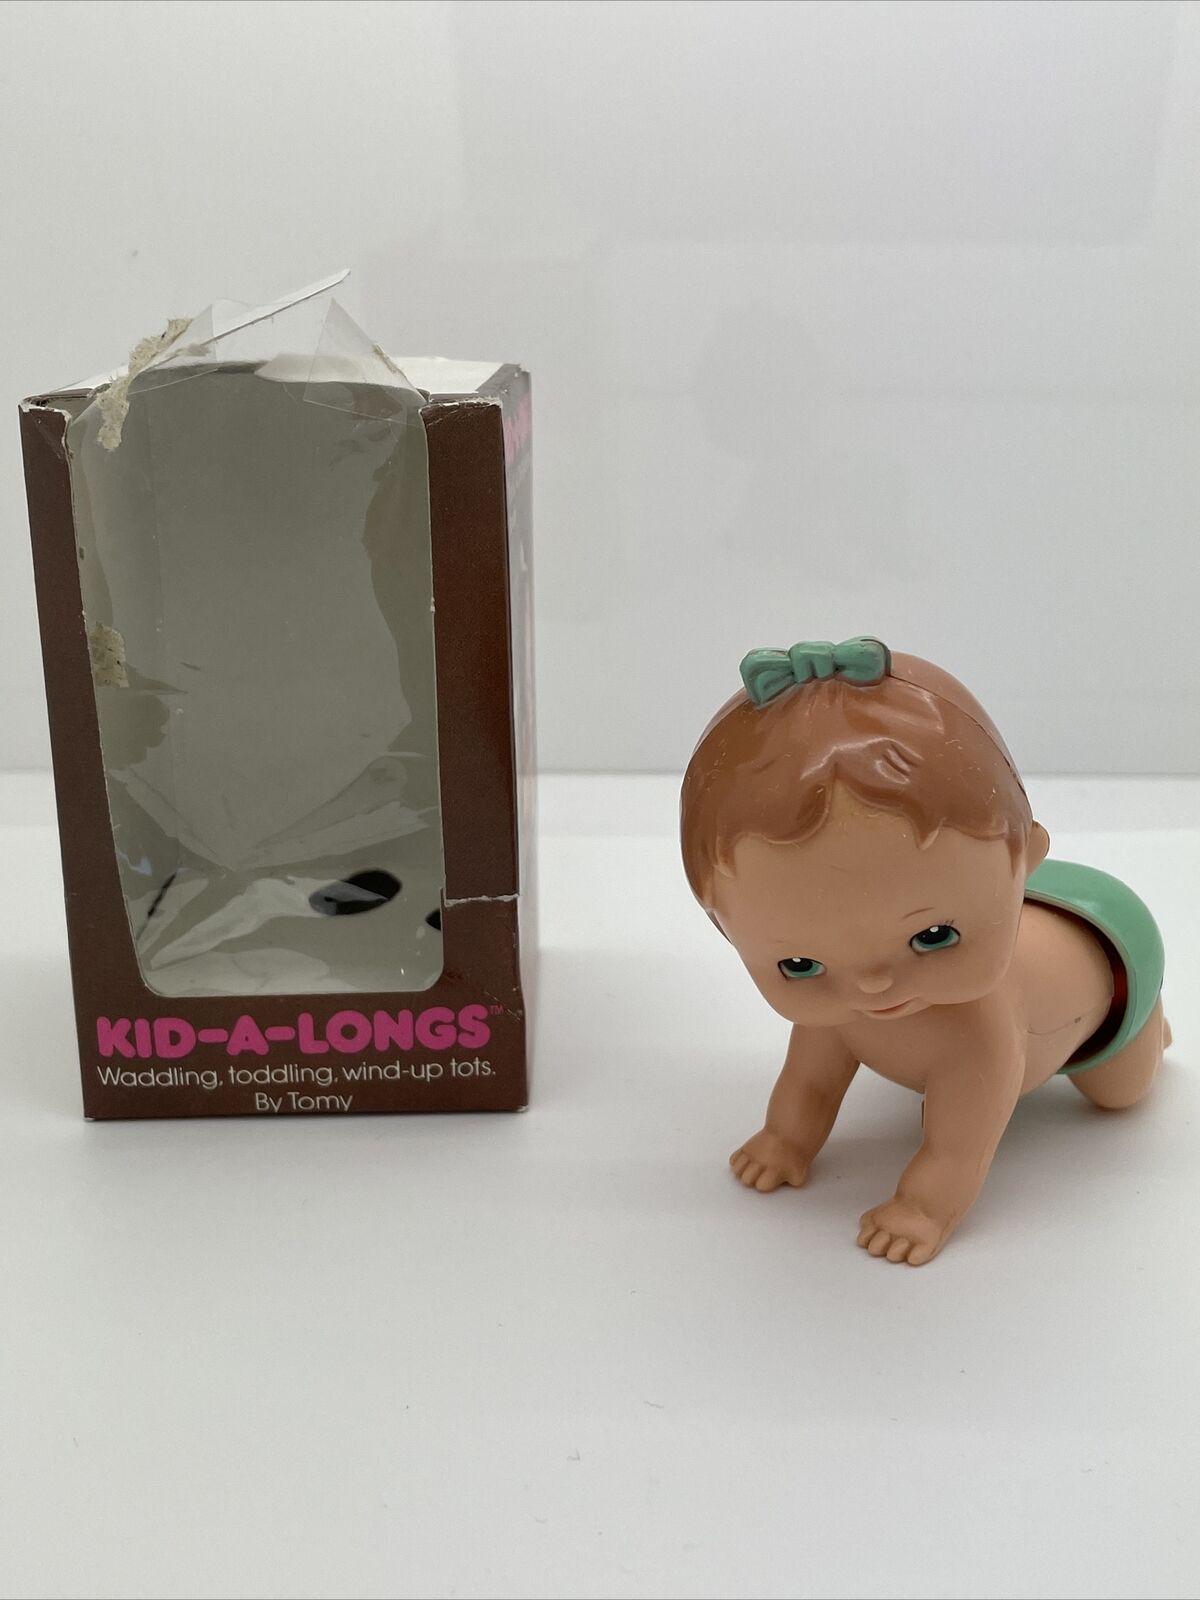 Vintage 1977 Tomy Corp Wind-up Crawling Baby Toy Kid-a-longs Teal Bow